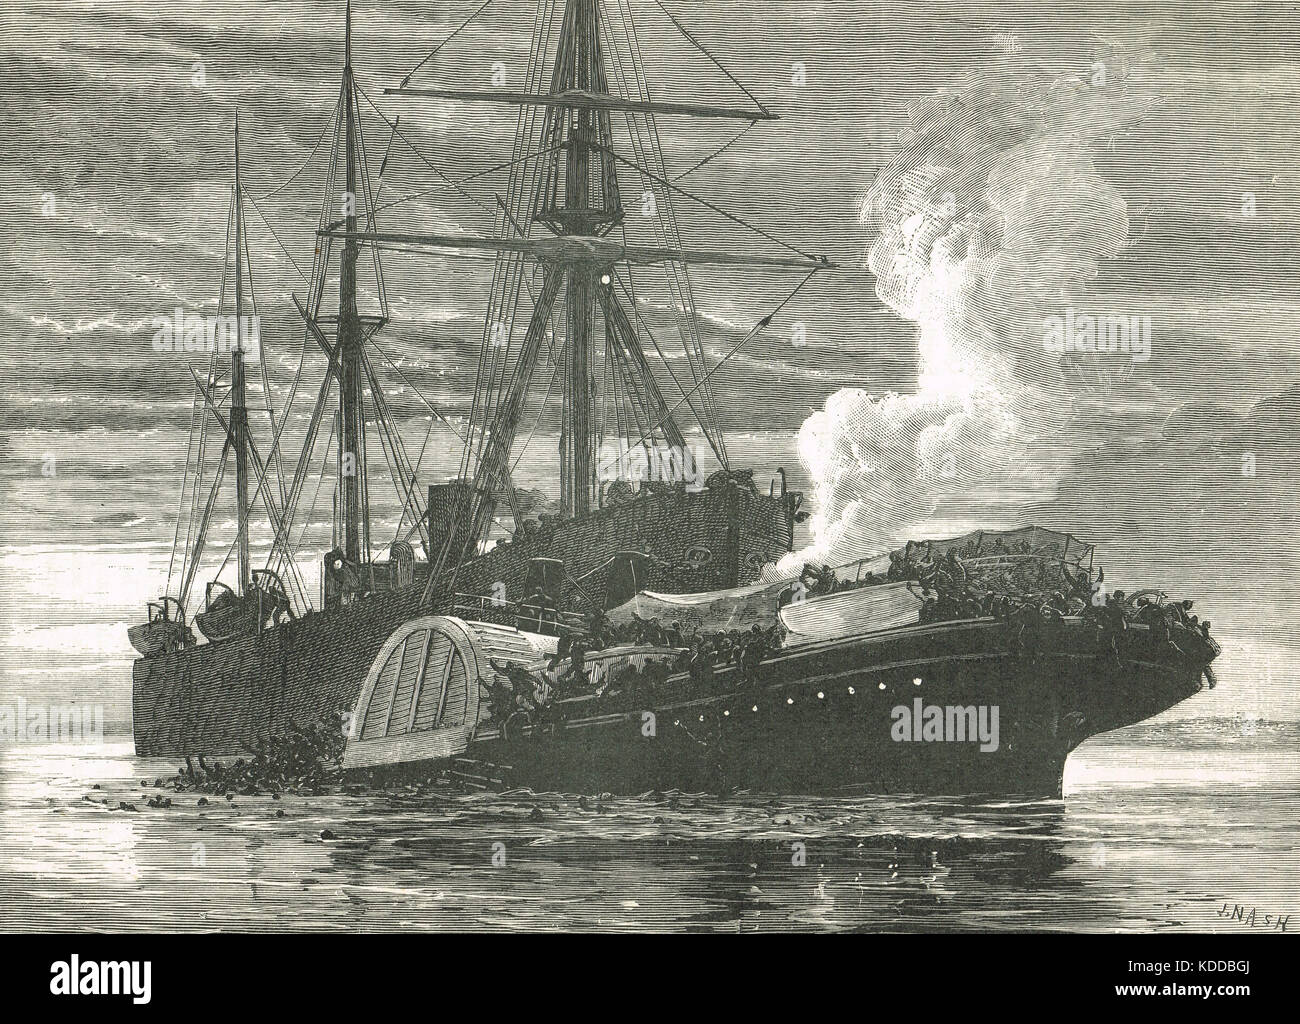 Collision of the Collier Bywell Castle & the Paddle Steamer SS Princess Alice sul Tamigi, 3 settembre 1878 Foto Stock